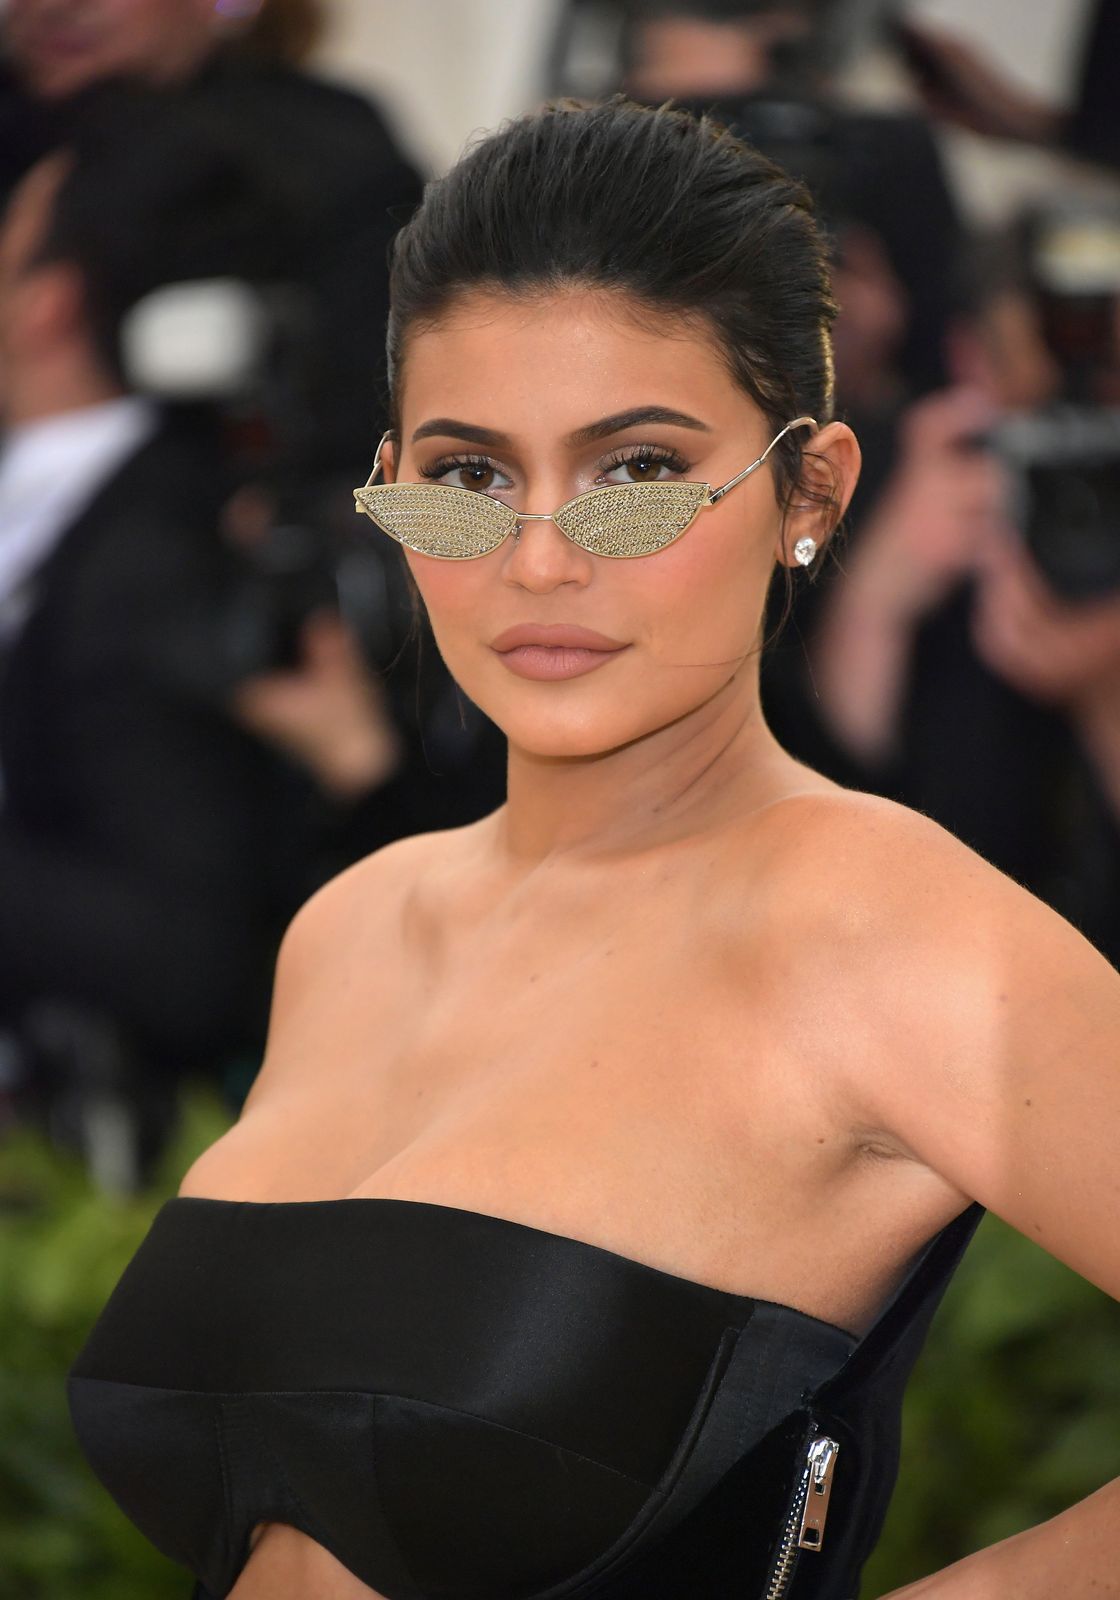 Kylie Jenner at the MET Gala in 2018 in New York City | Source: Getty Images